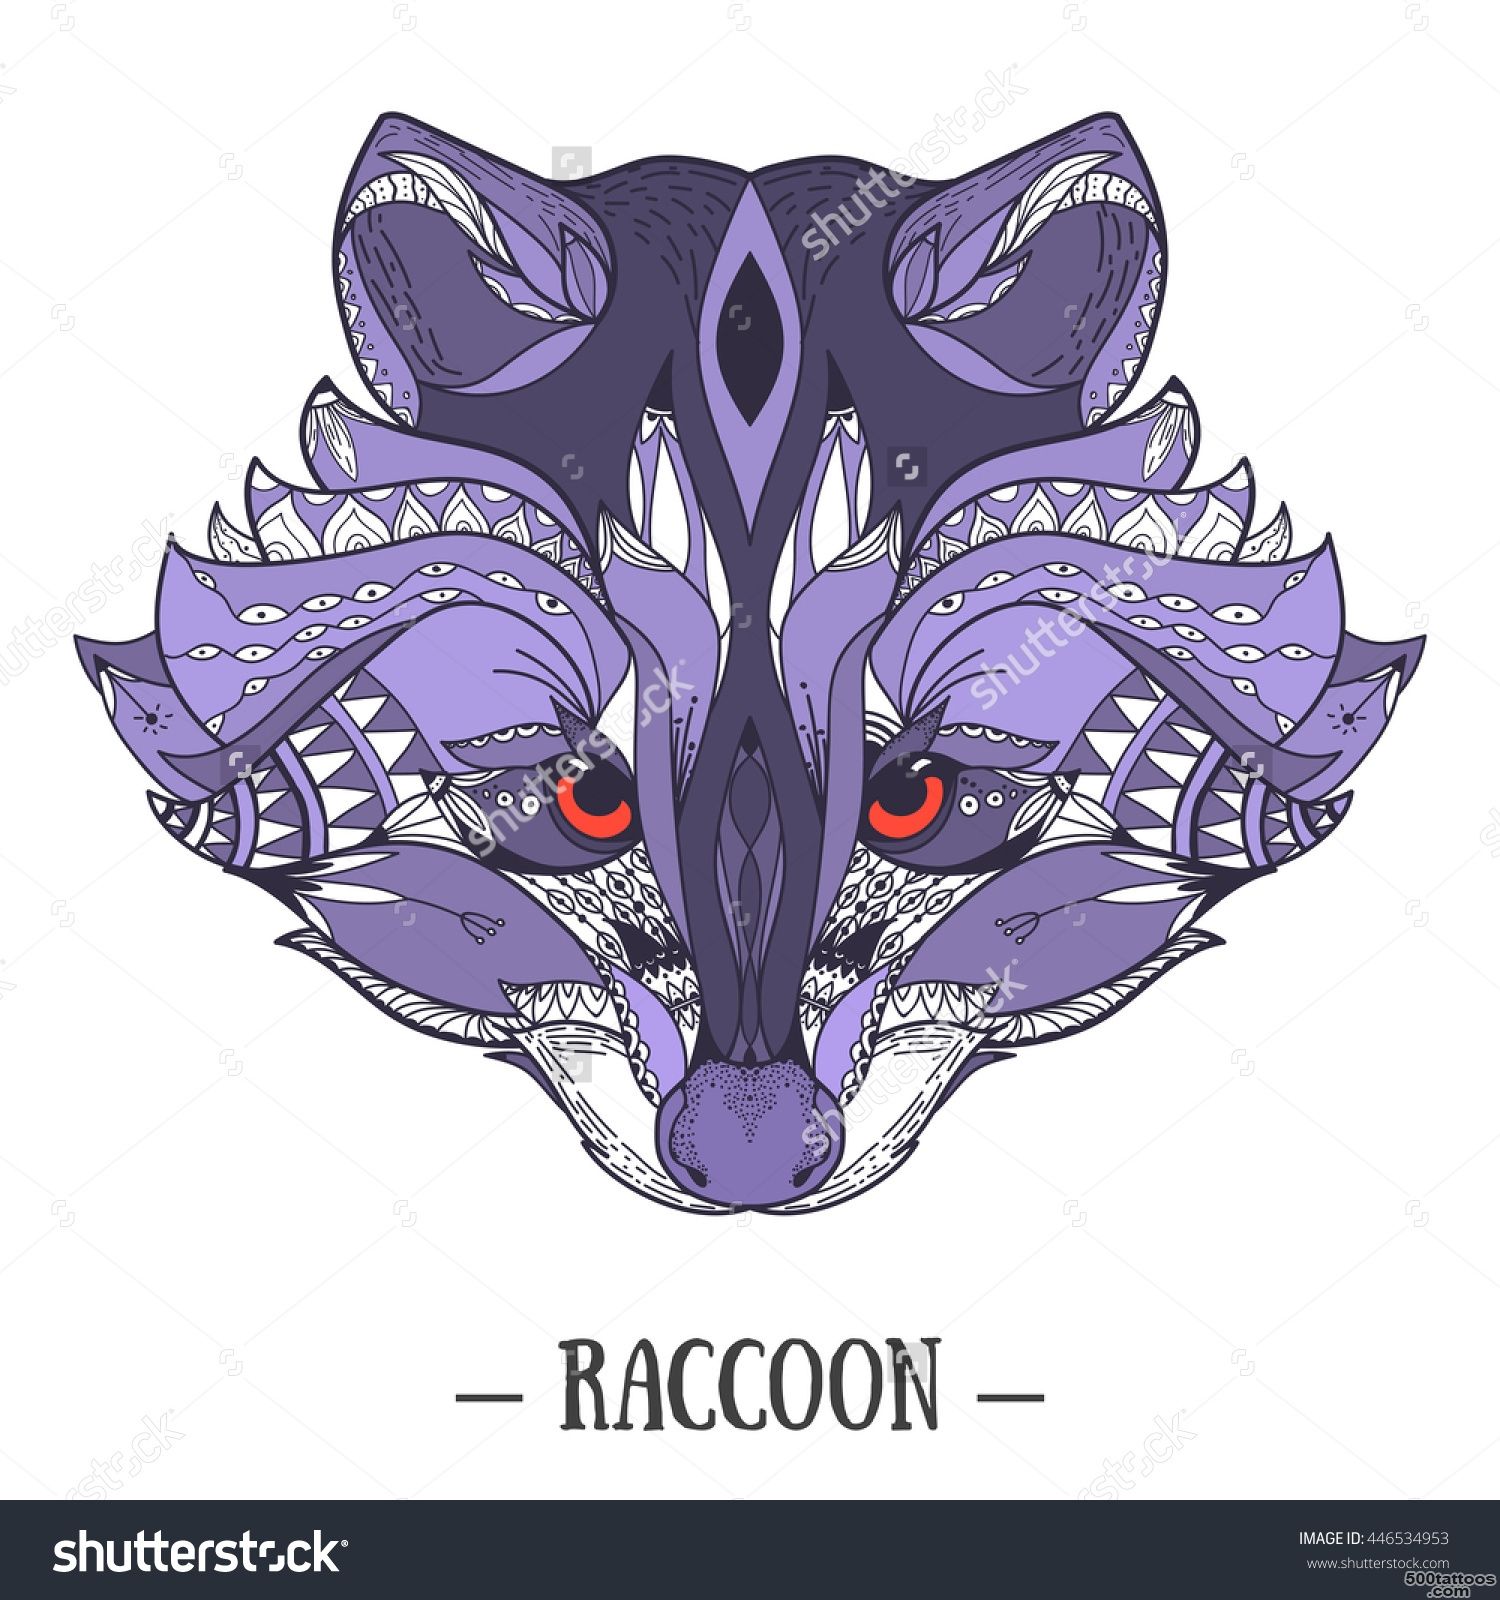 Raccoon Tattoo Stock Photos, Images, amp Pictures  Shutterstock_50